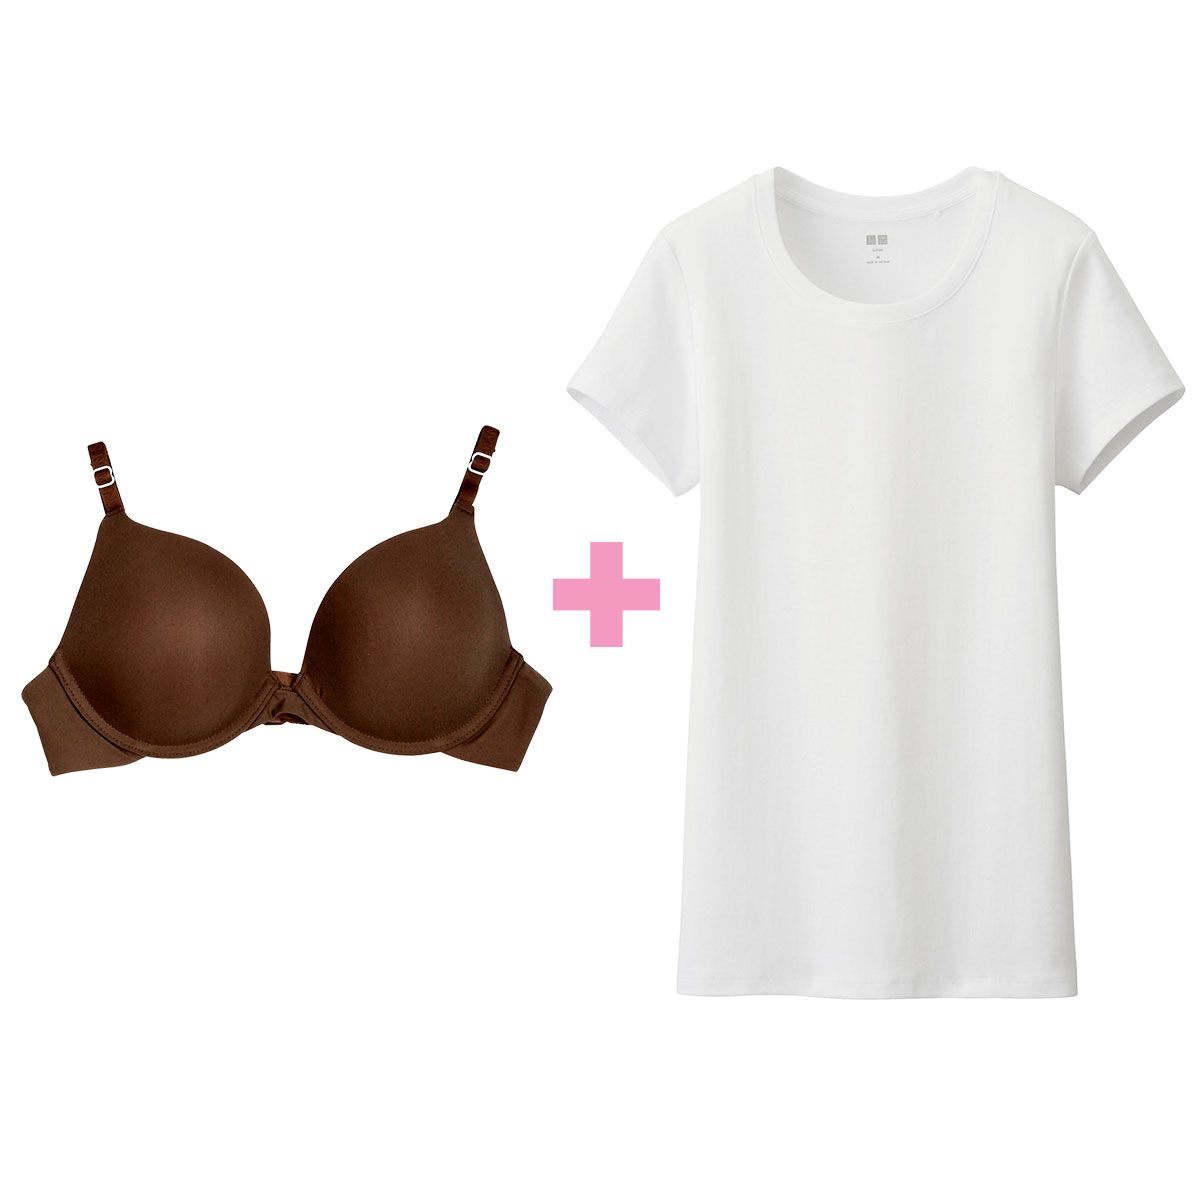 What Color Bra Should You Wear Under a White Shirt?